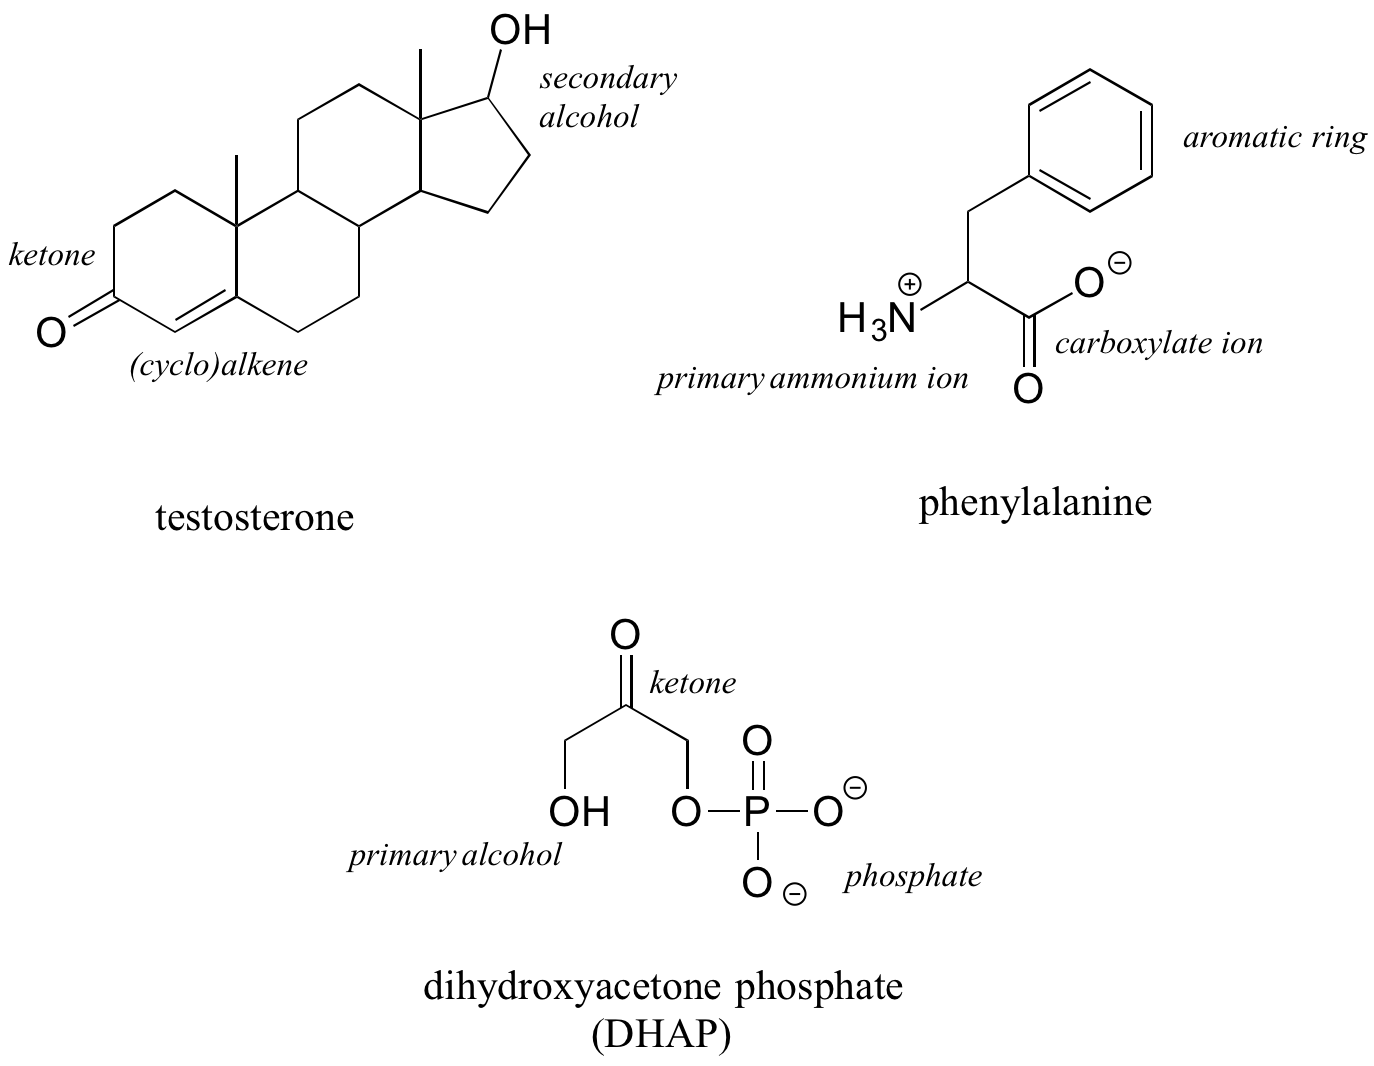 Line-bond structures of larger biological molecules containing multiple functional groups, labeled. Testosterone C19H28O2 includes a ketone, an alkene and a secondary alcohol. Phenylalanine C9H11NO2 contains an aromatic rings, a carboxylate ion and a primary ammonium ion (a charged amine). Dihydroxyacetone phosphate, also known as DHAP, C3H7O6P contains a primary alcohol, a ketone, and a phosphate group.